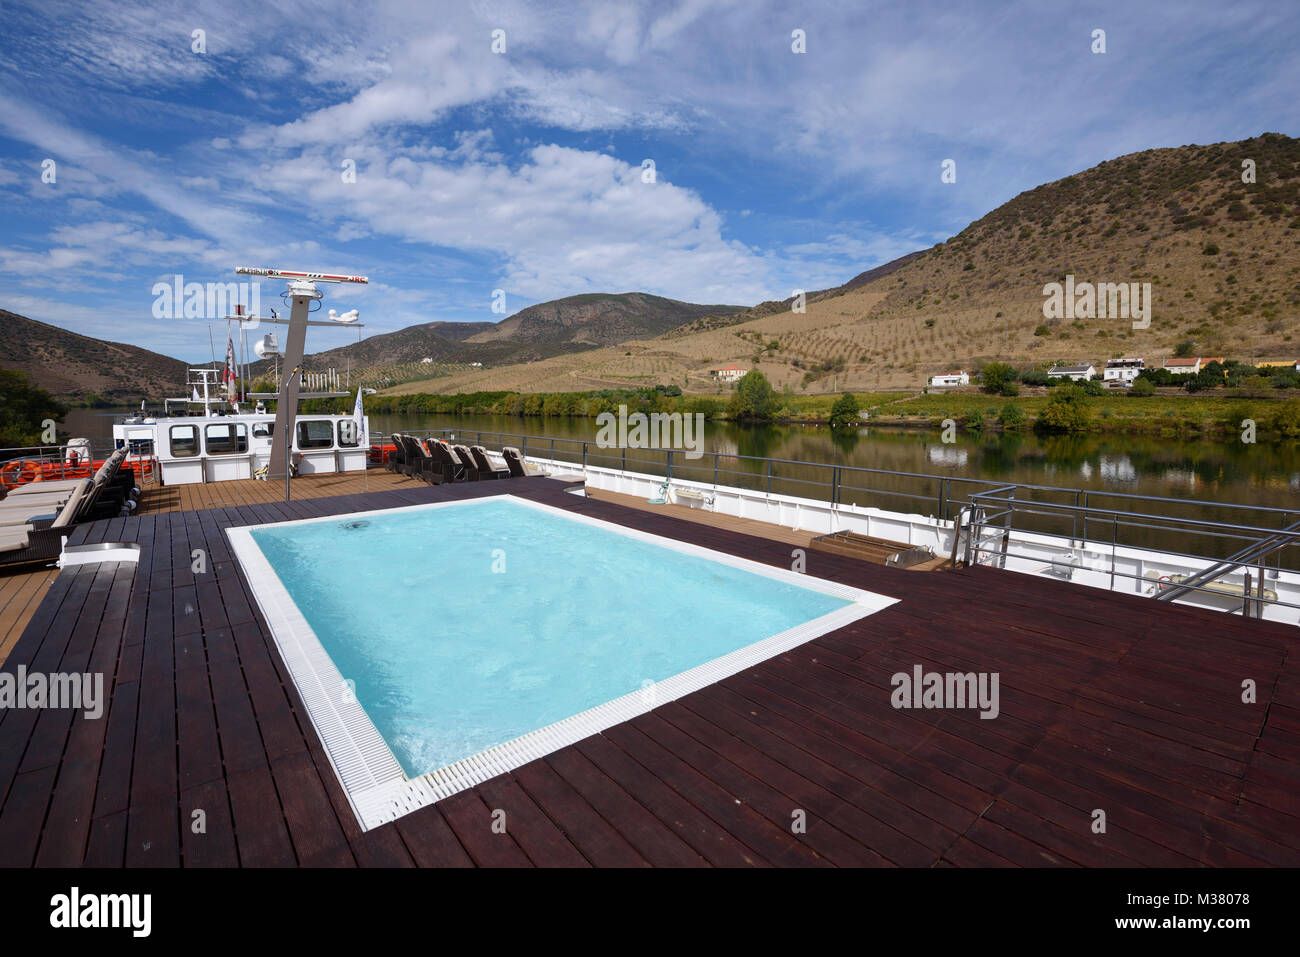 Douro Valley landscape viewed from the upper deck of the Douro Spirit cruise boat while moored at Barca d’Alva, Portugal, Europe Stock Photo